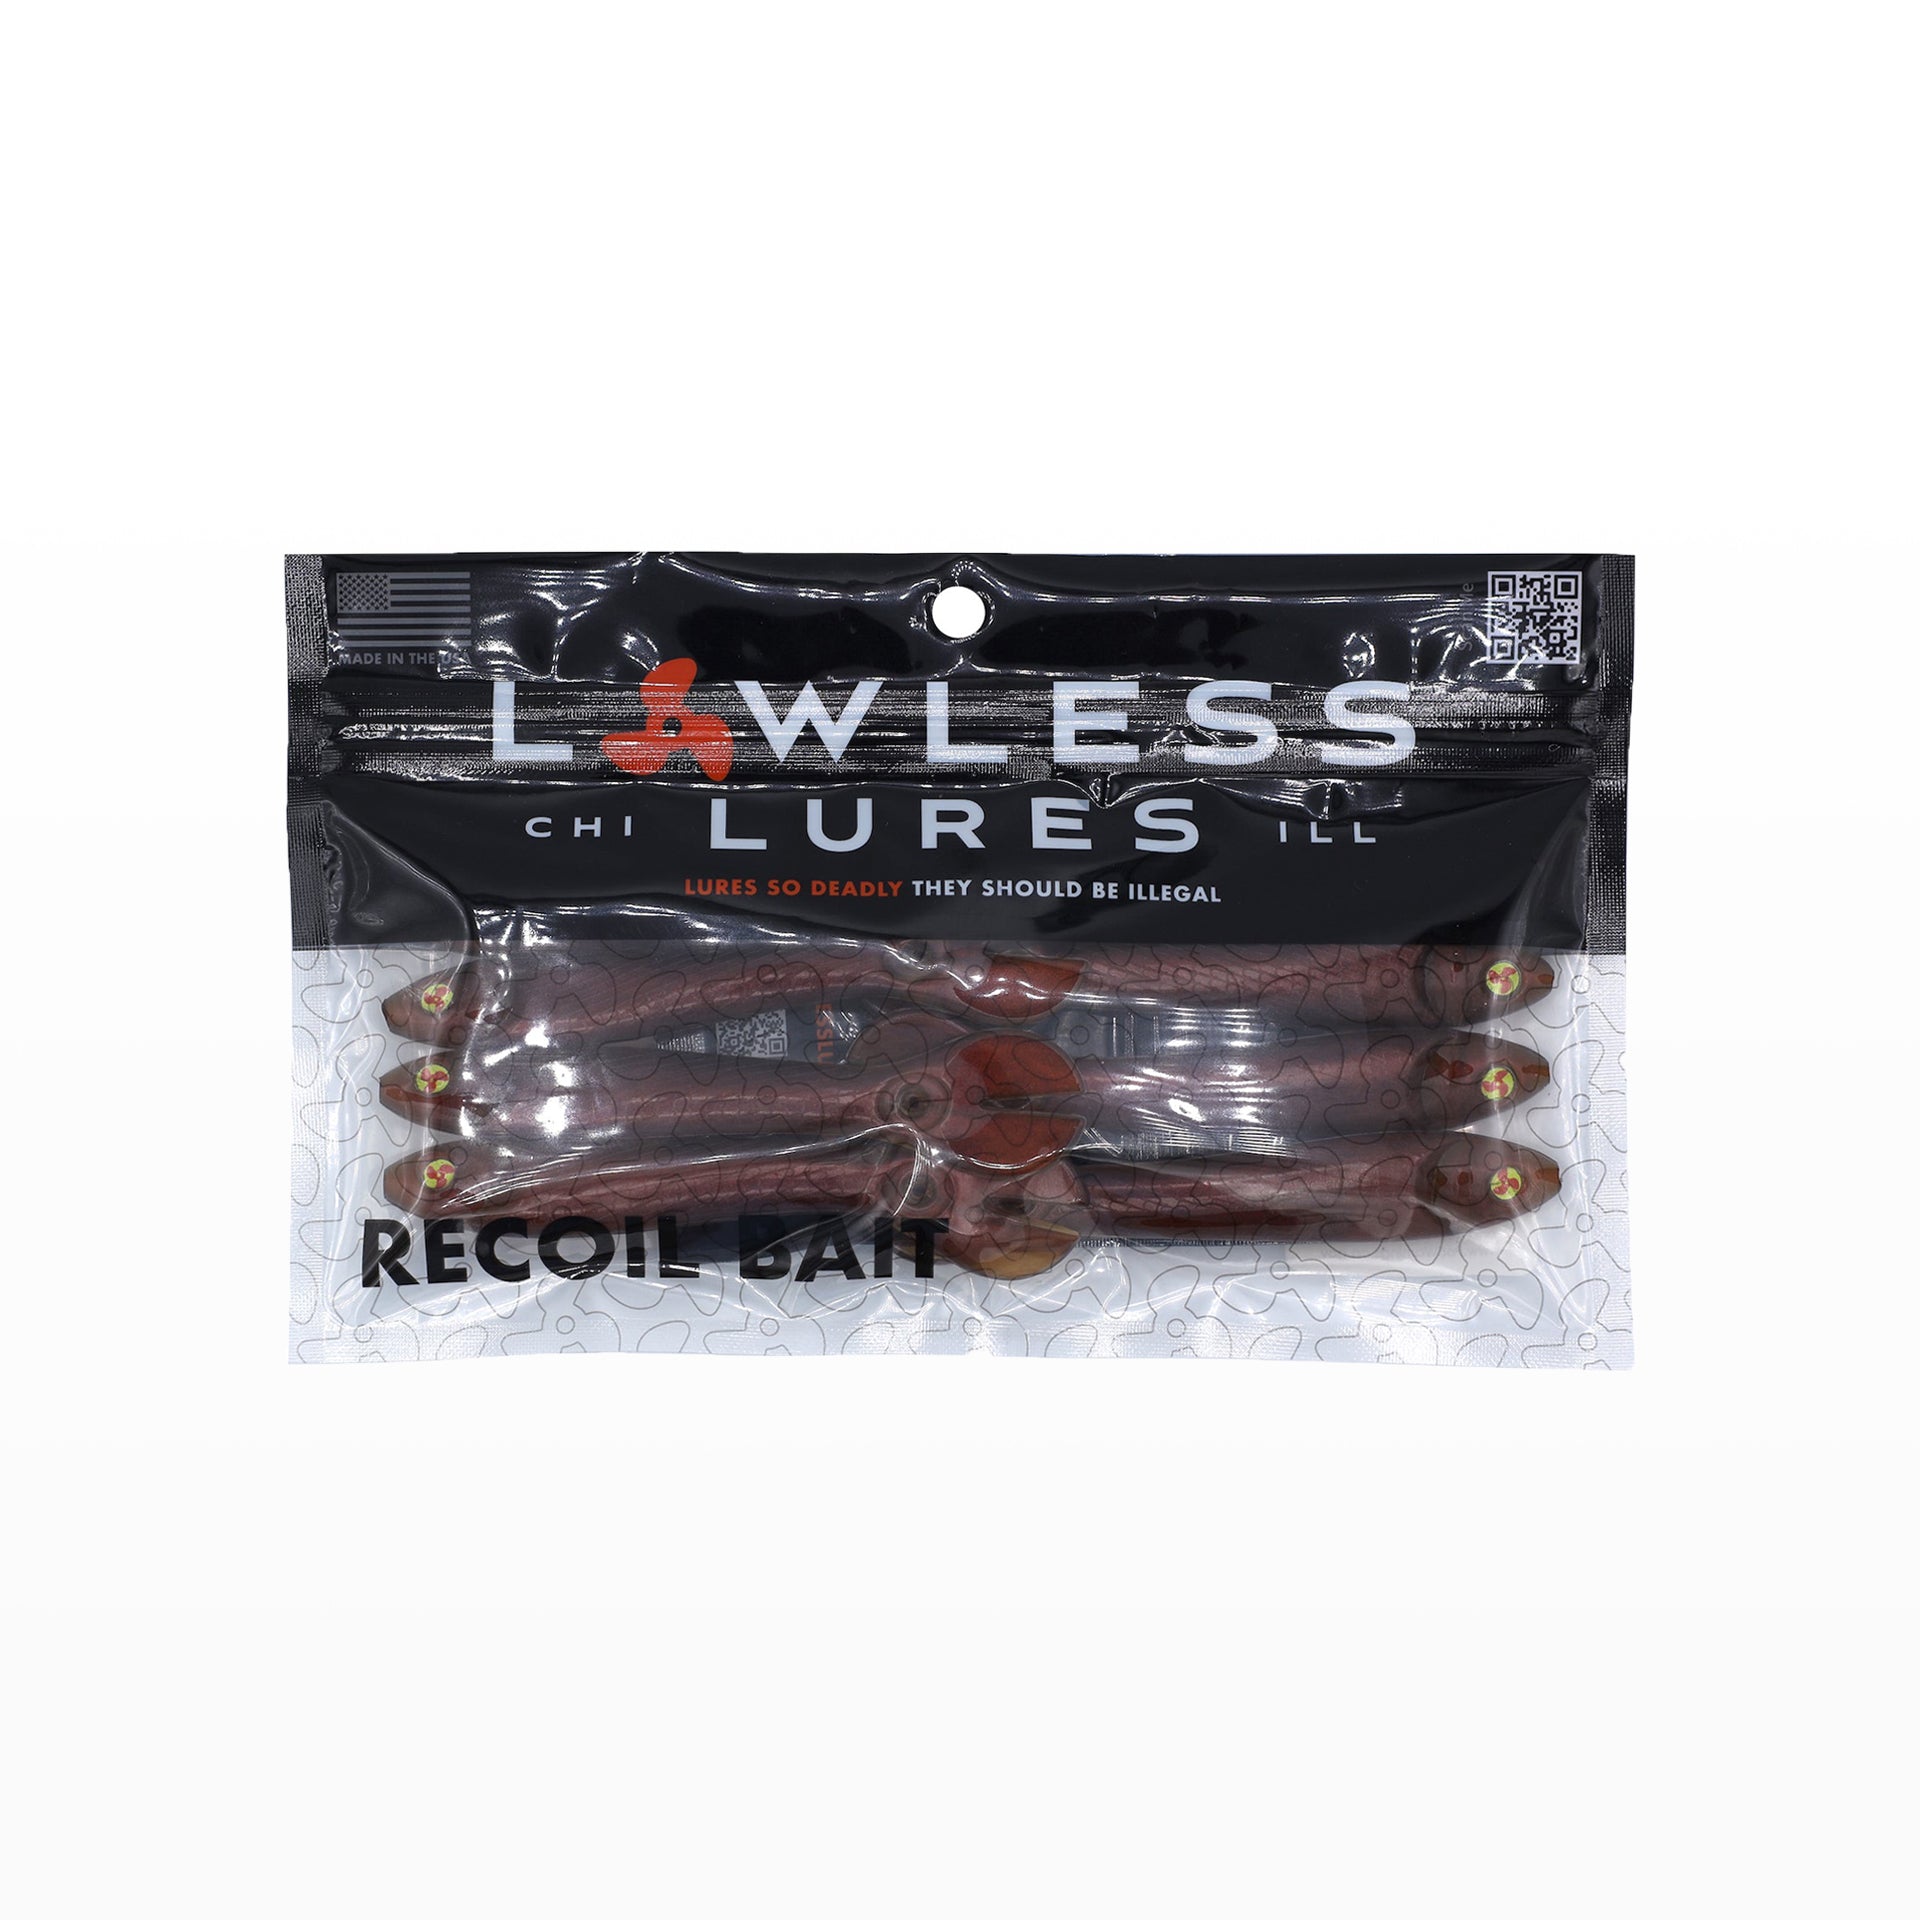 Bad Penny (Copper) - 5.25 Lawless Lures 5 Pc Recoil Bait Set